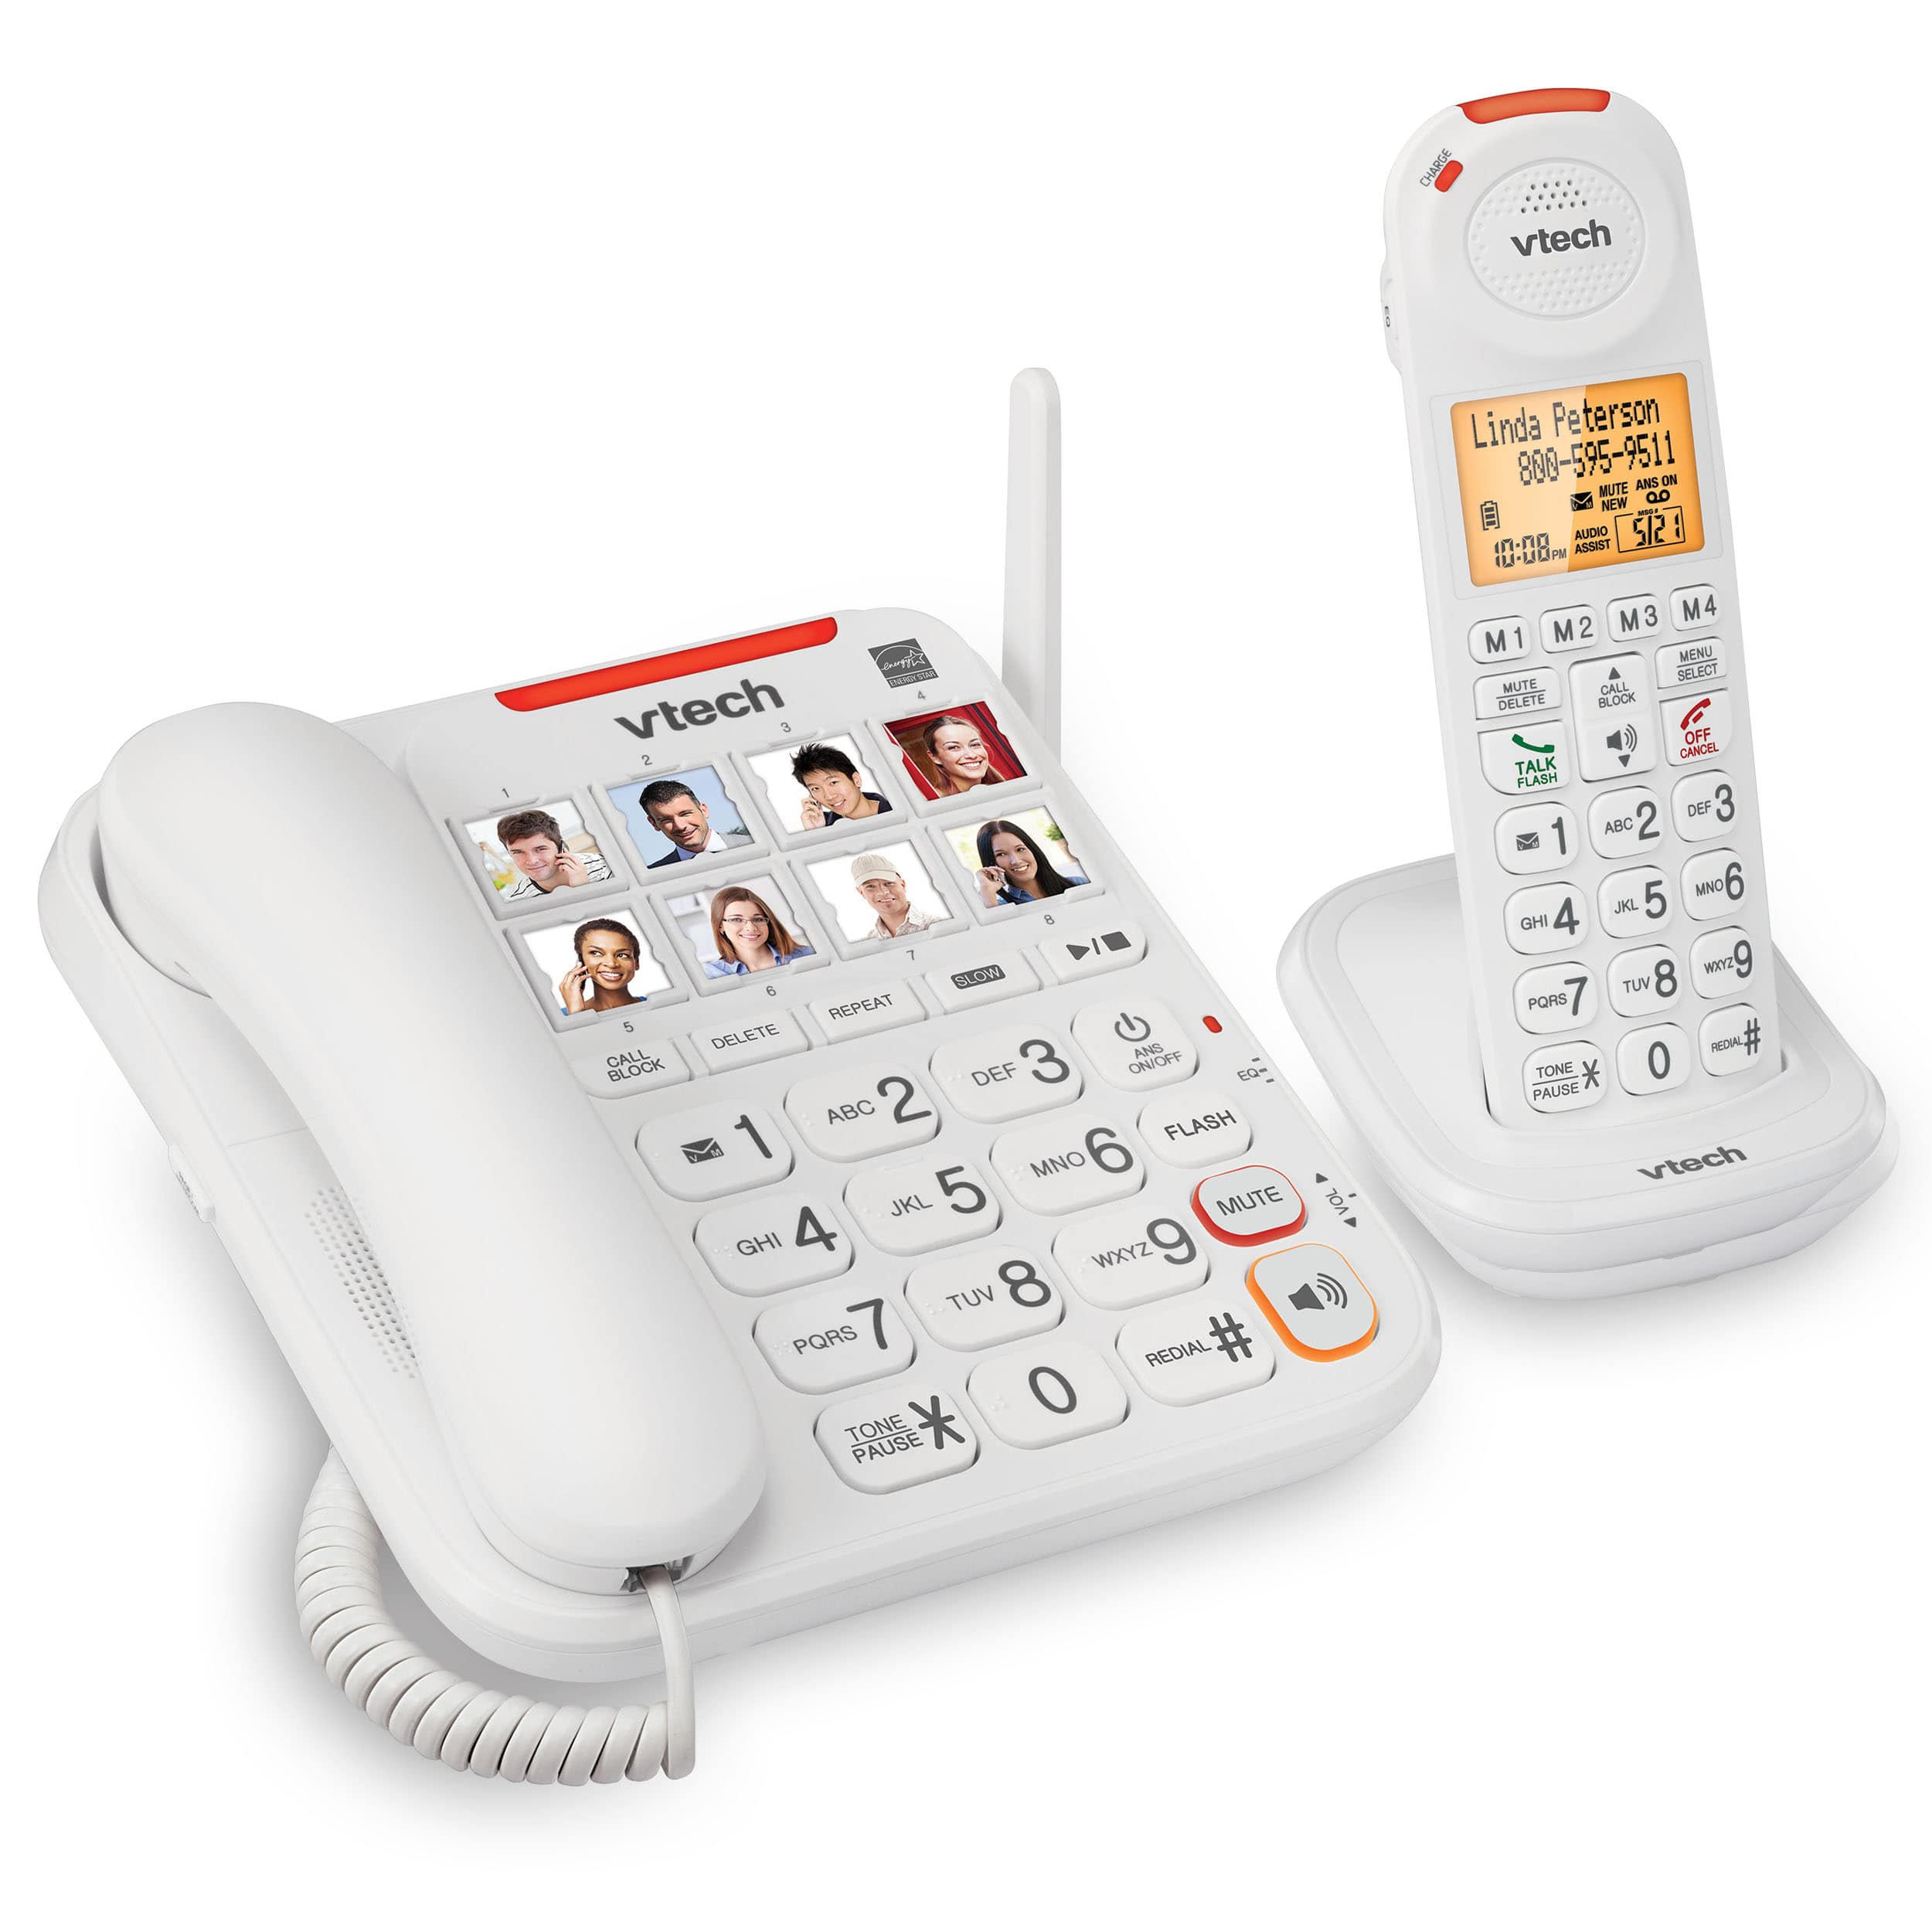 3 Handset Amplified Corded/Cordless Answering System - view 3